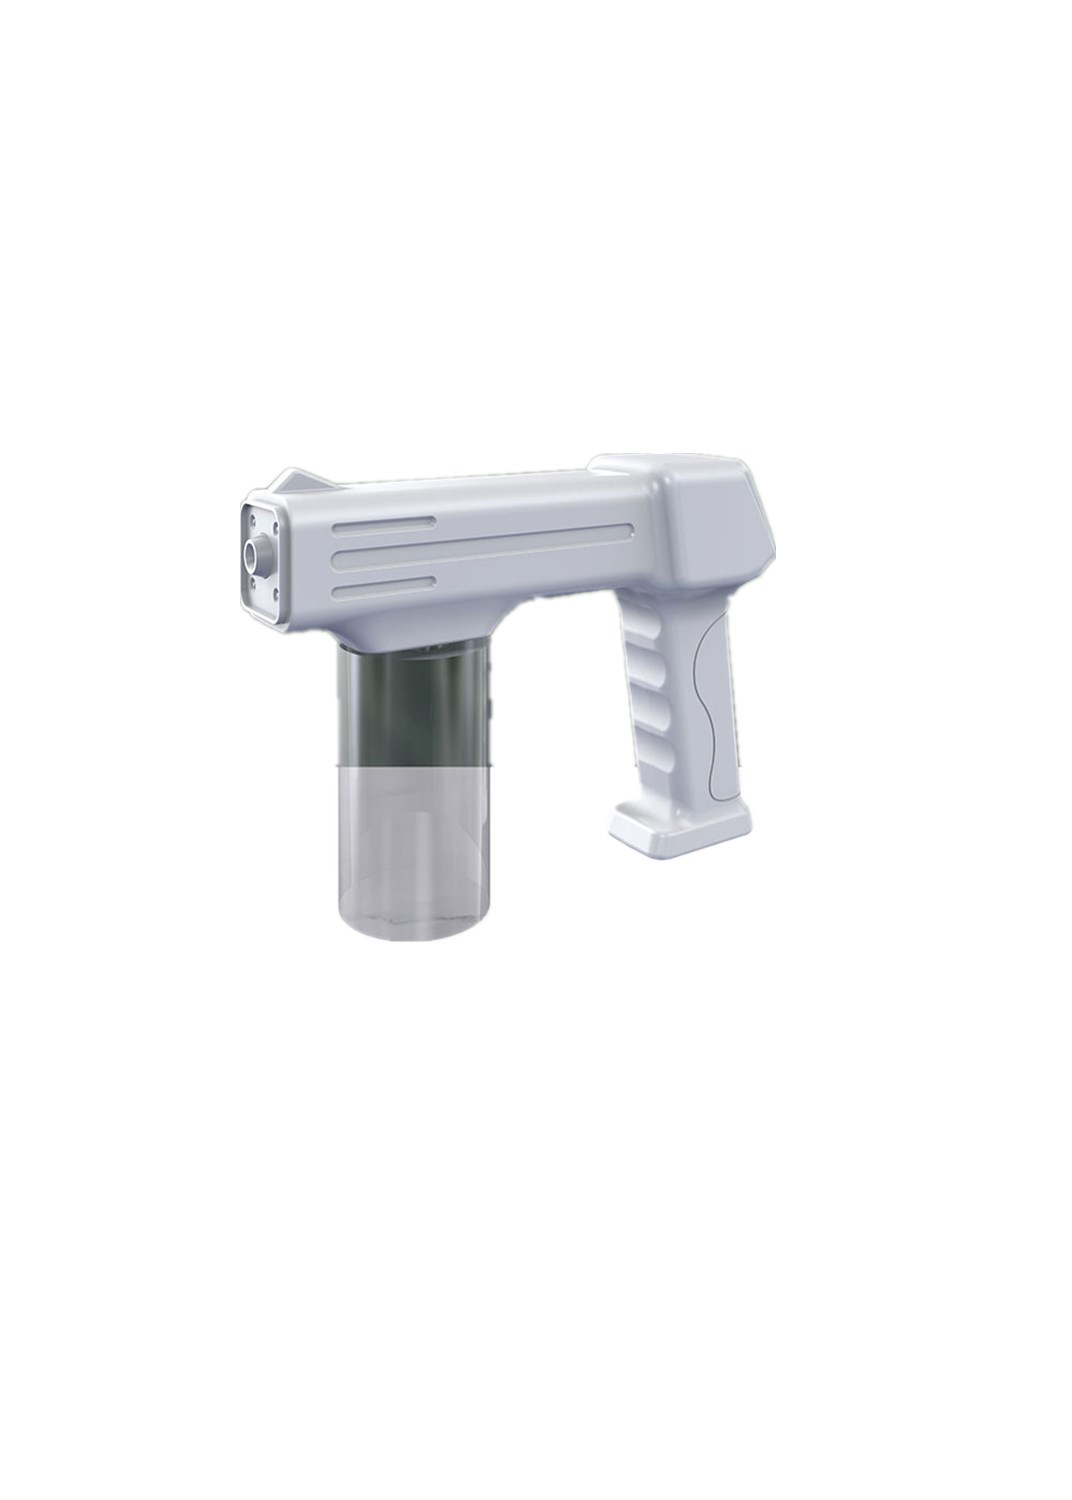 What are the advantages of the Spray Sanitizing Gun?